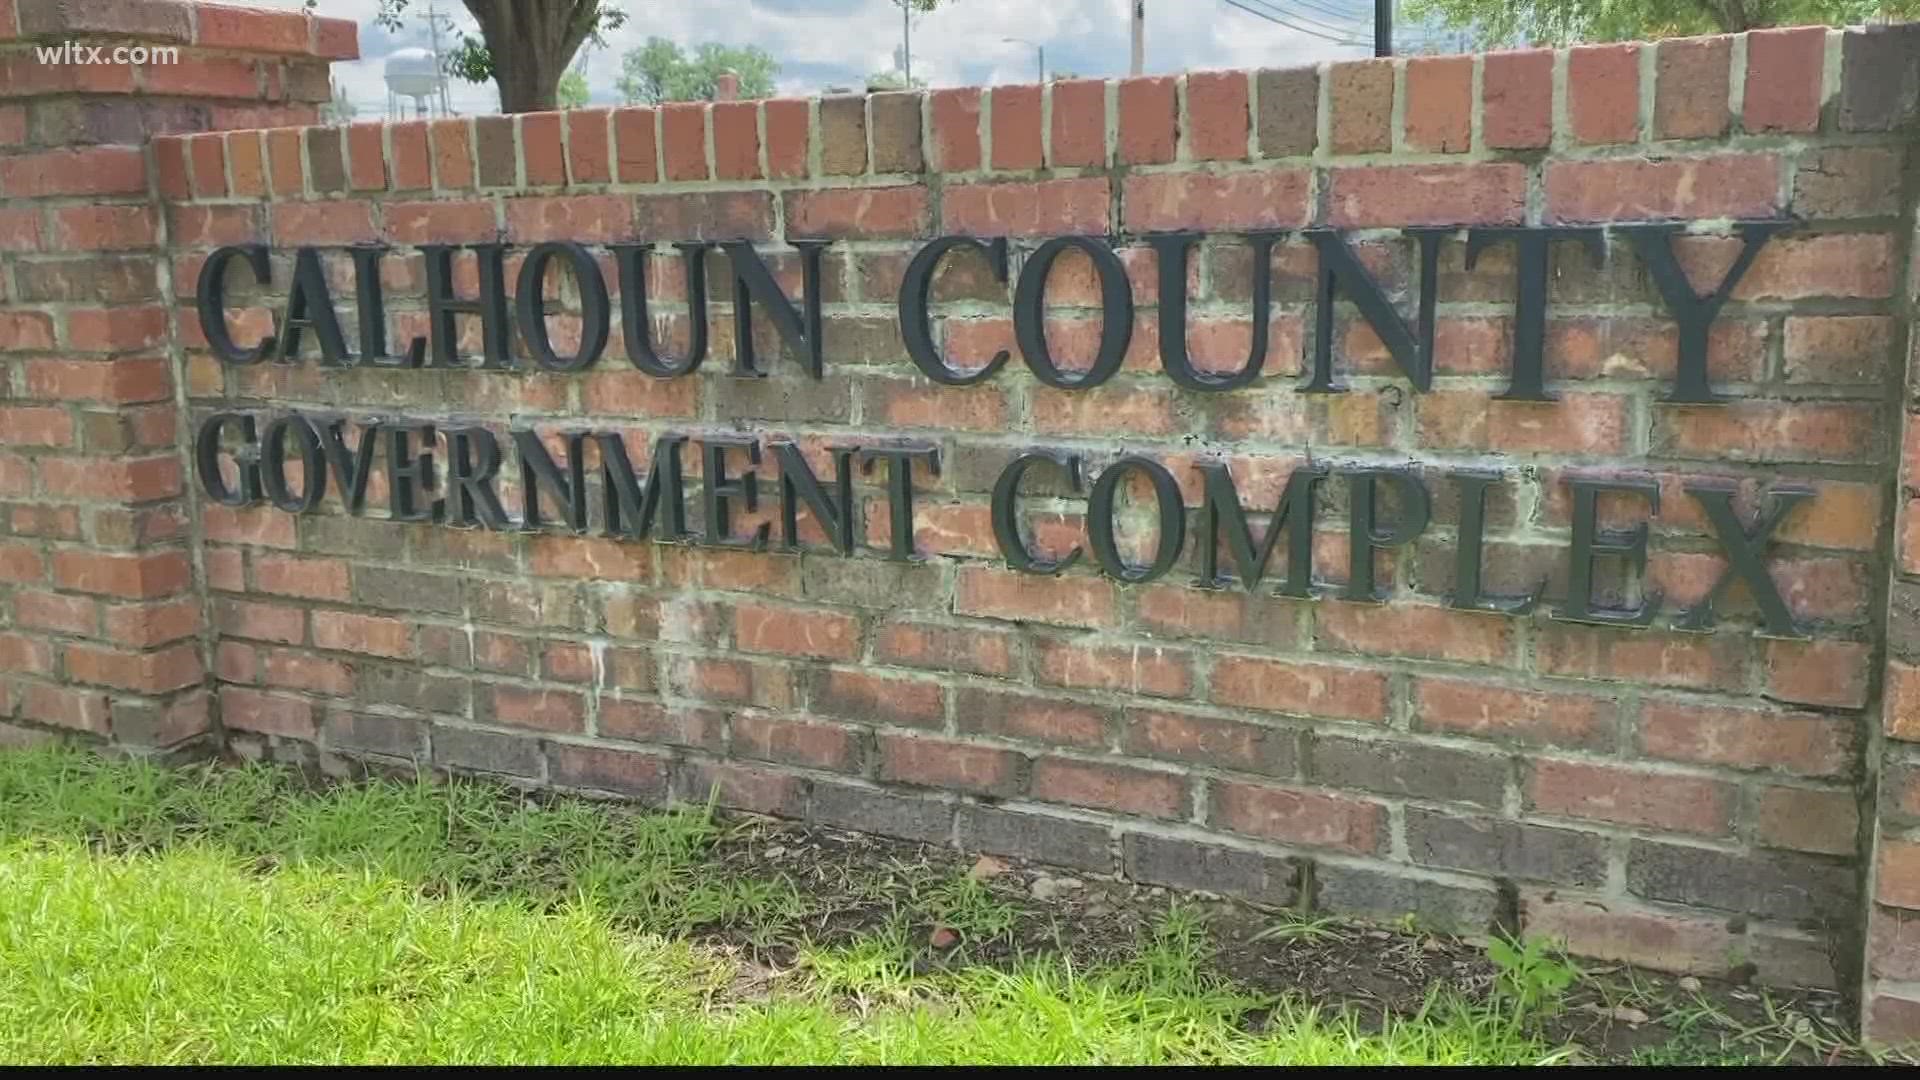 Voters in Calhoun County could vote on new form of government on the November ballot. Calhoun County is currently under a council form of government.